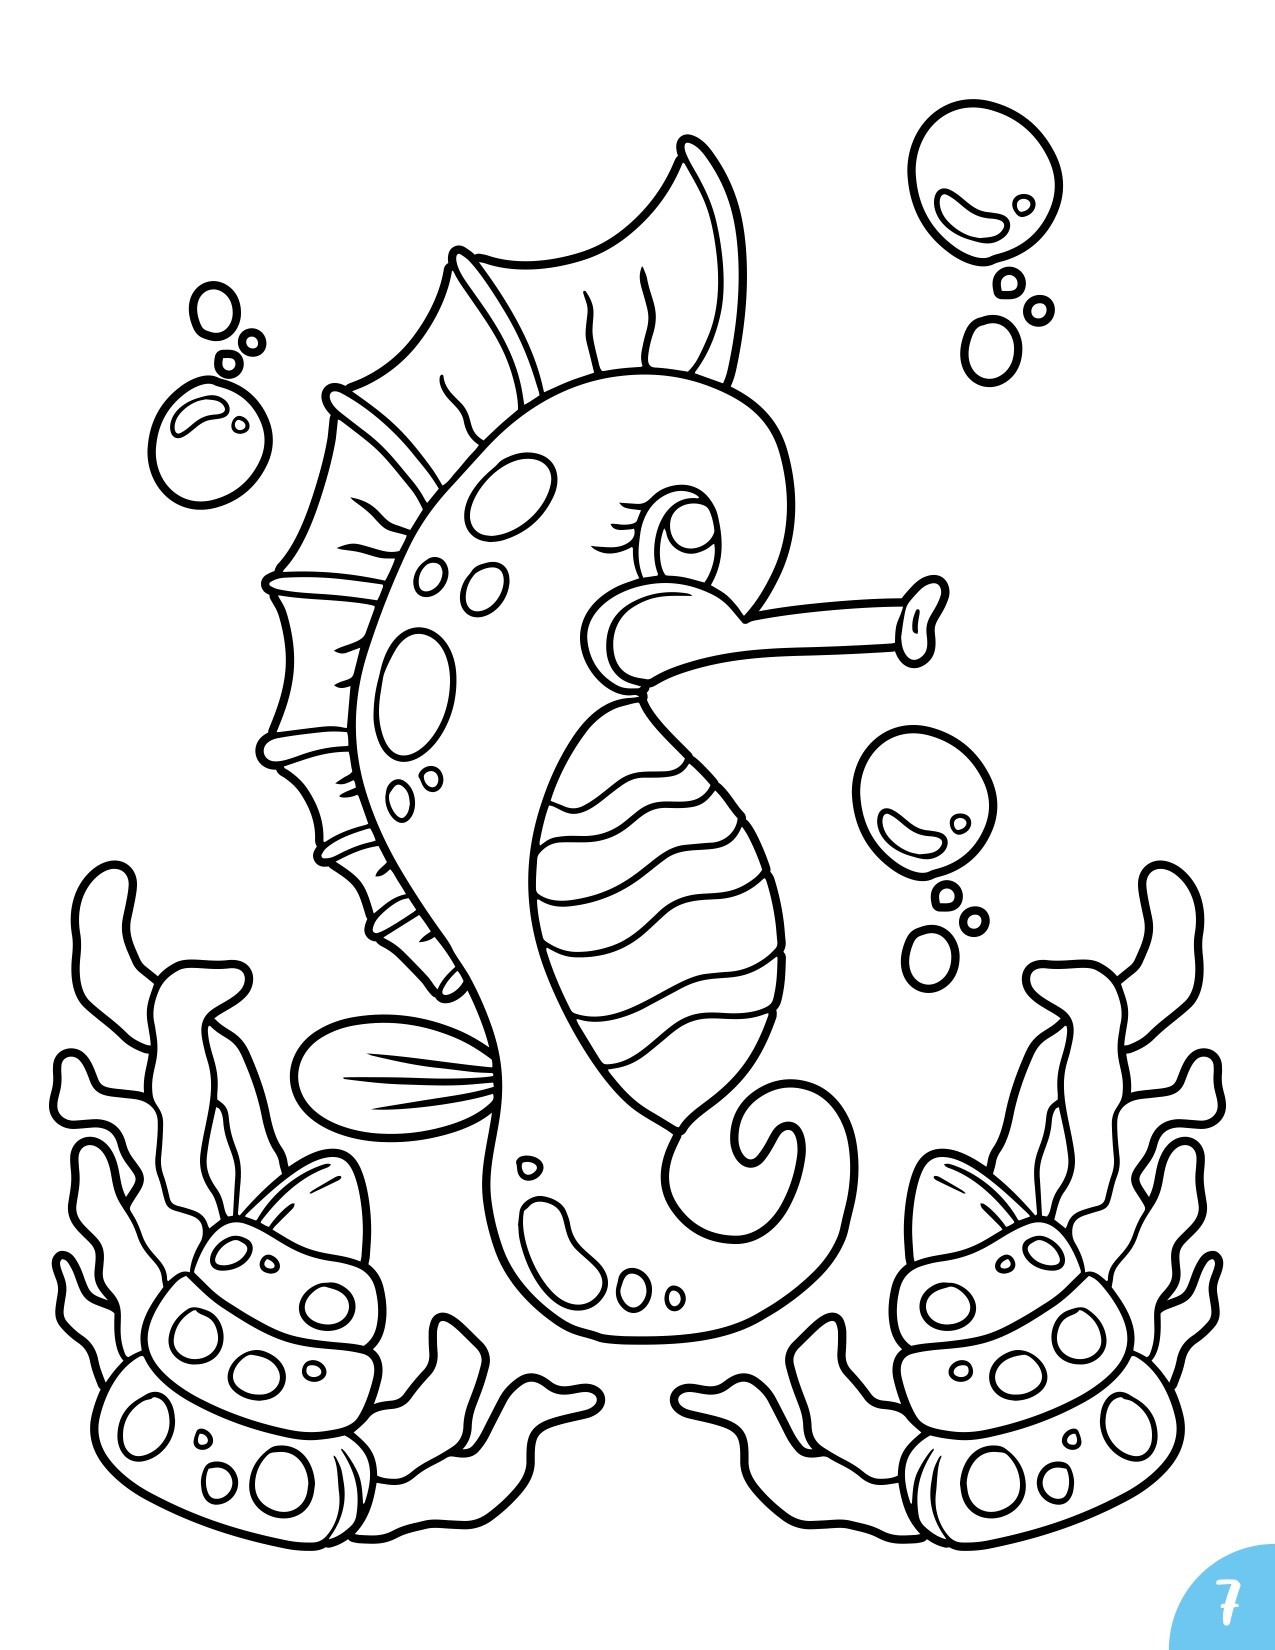 Kawaii seahorse coloring page for kids